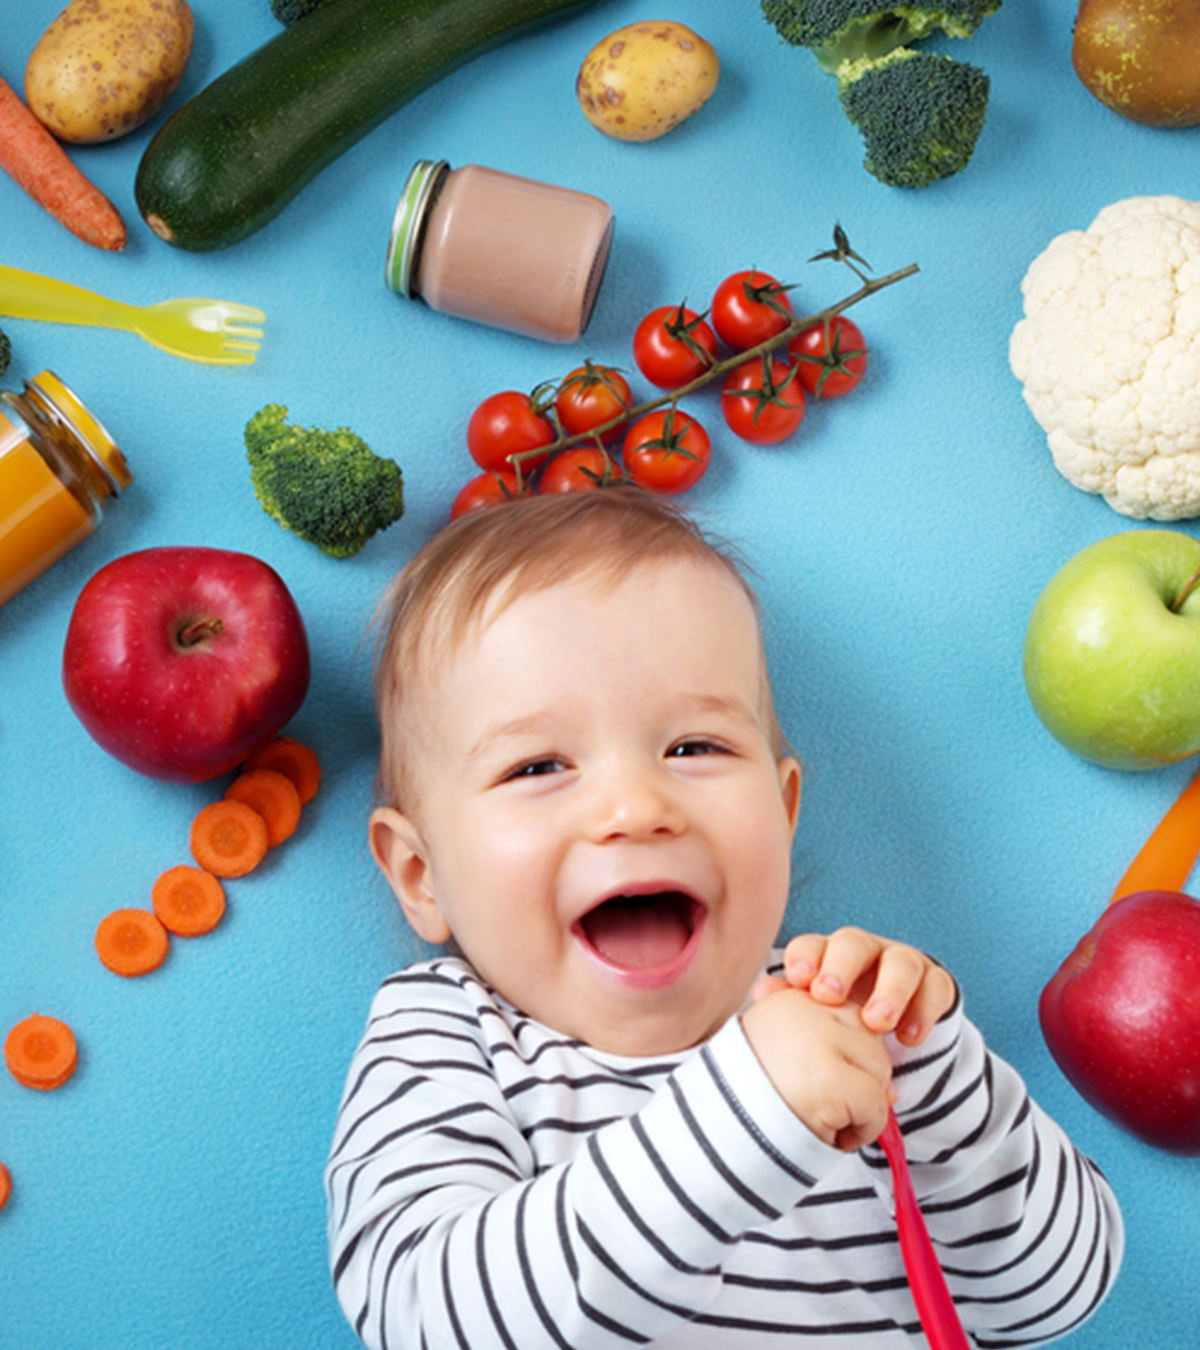 Healthy Food For Babies And Toddlers: The Five Food Groups